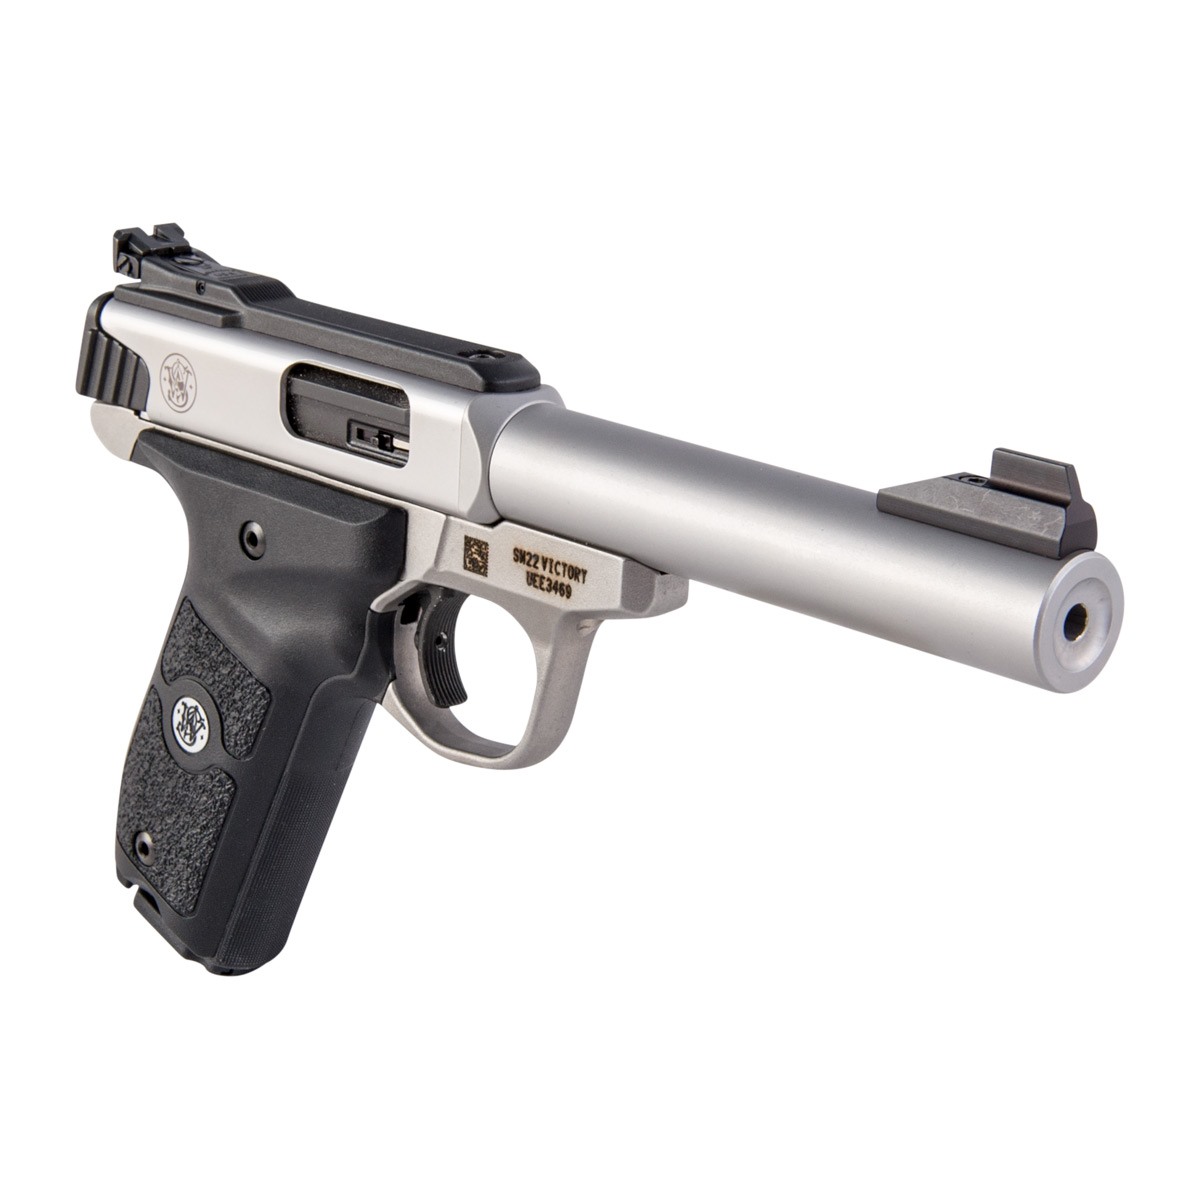 SMITH & WESSON SW22 VICTORY TARGET 22LR 10+1 5.5" SS | Brownells